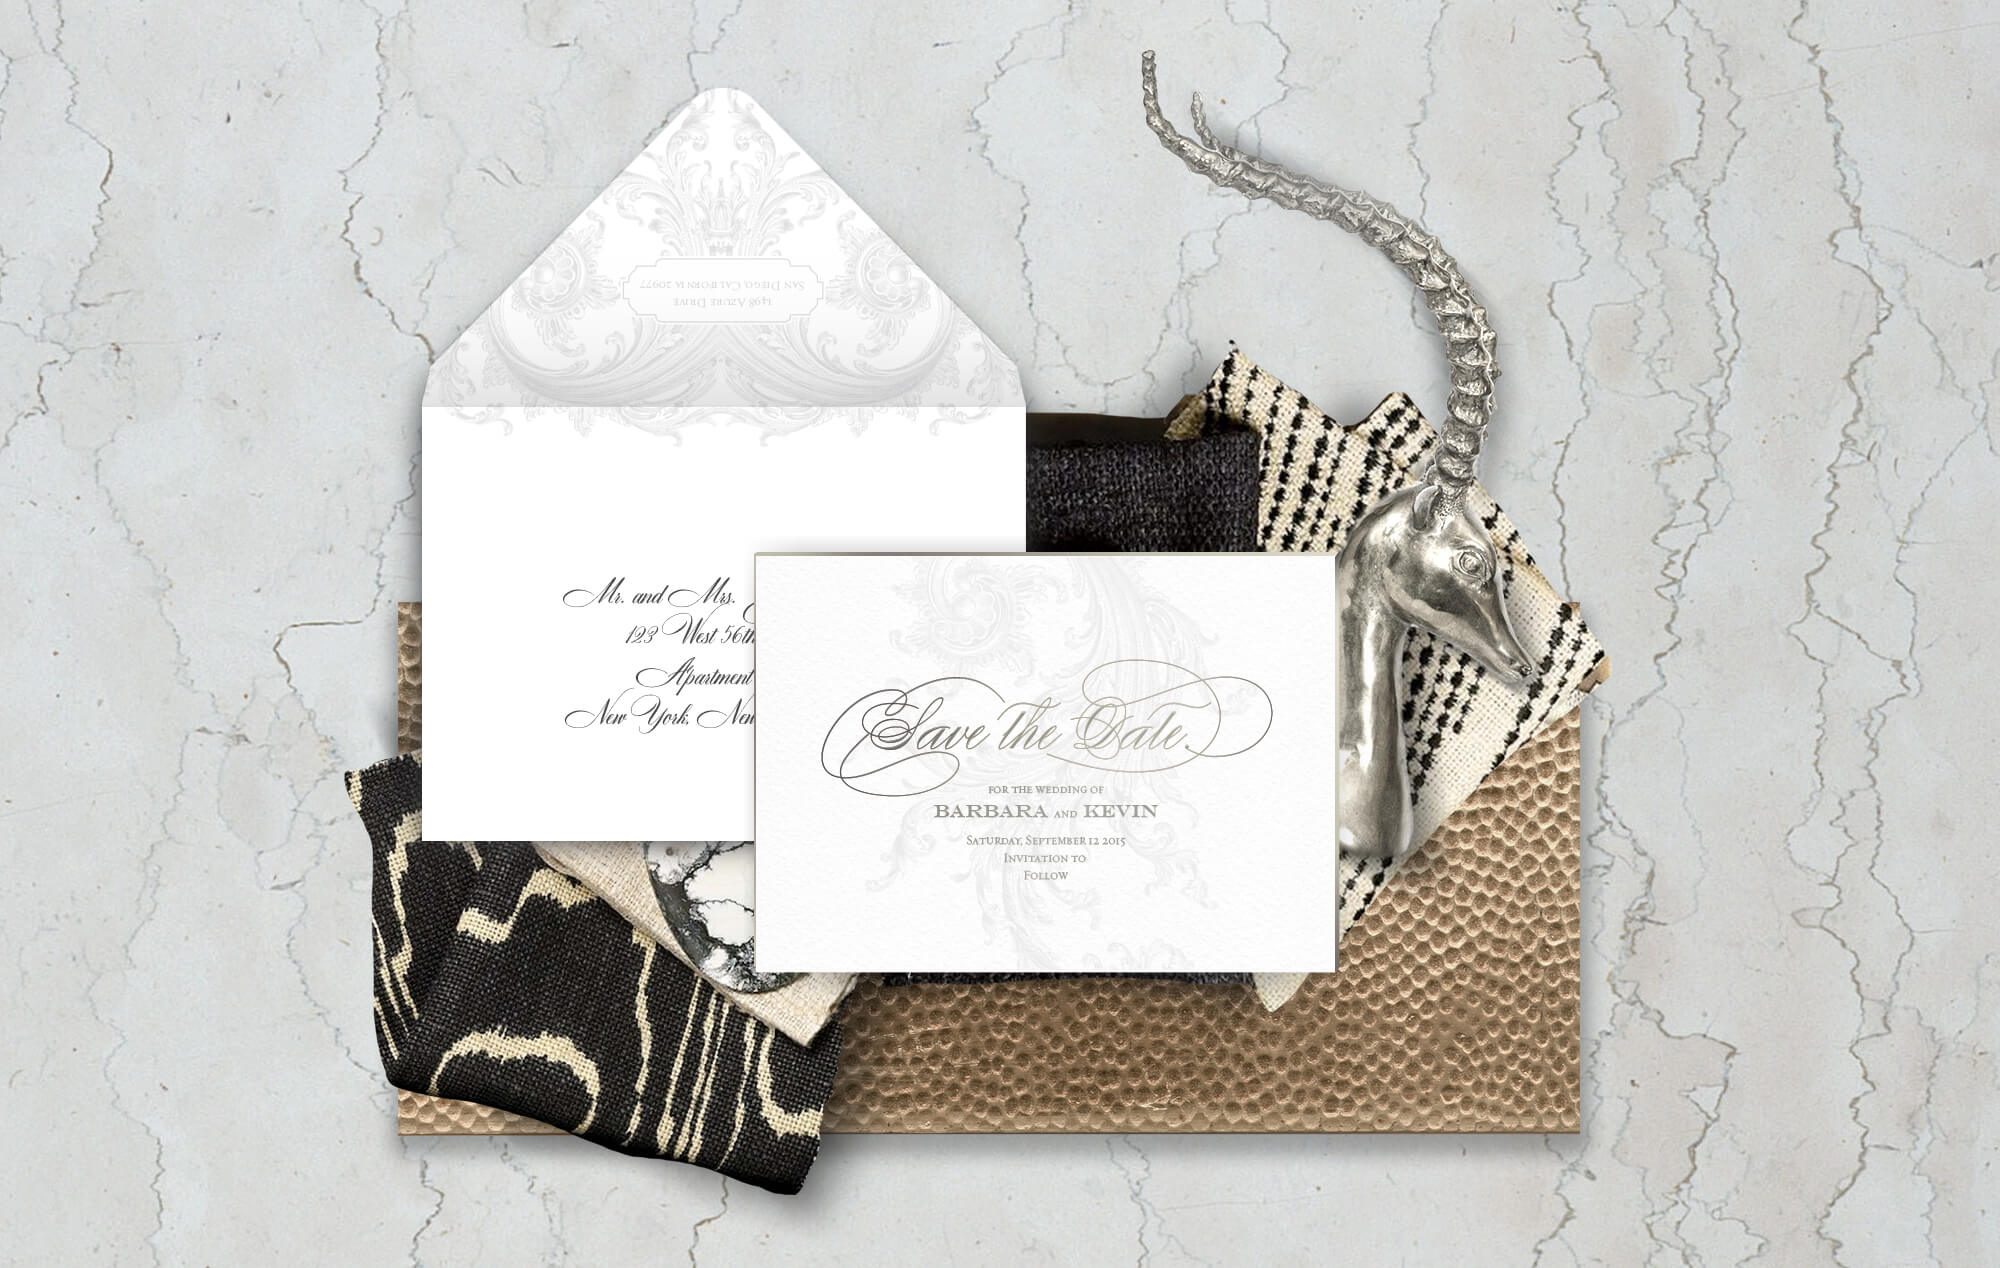 Opulent scrollwork wedding save the date